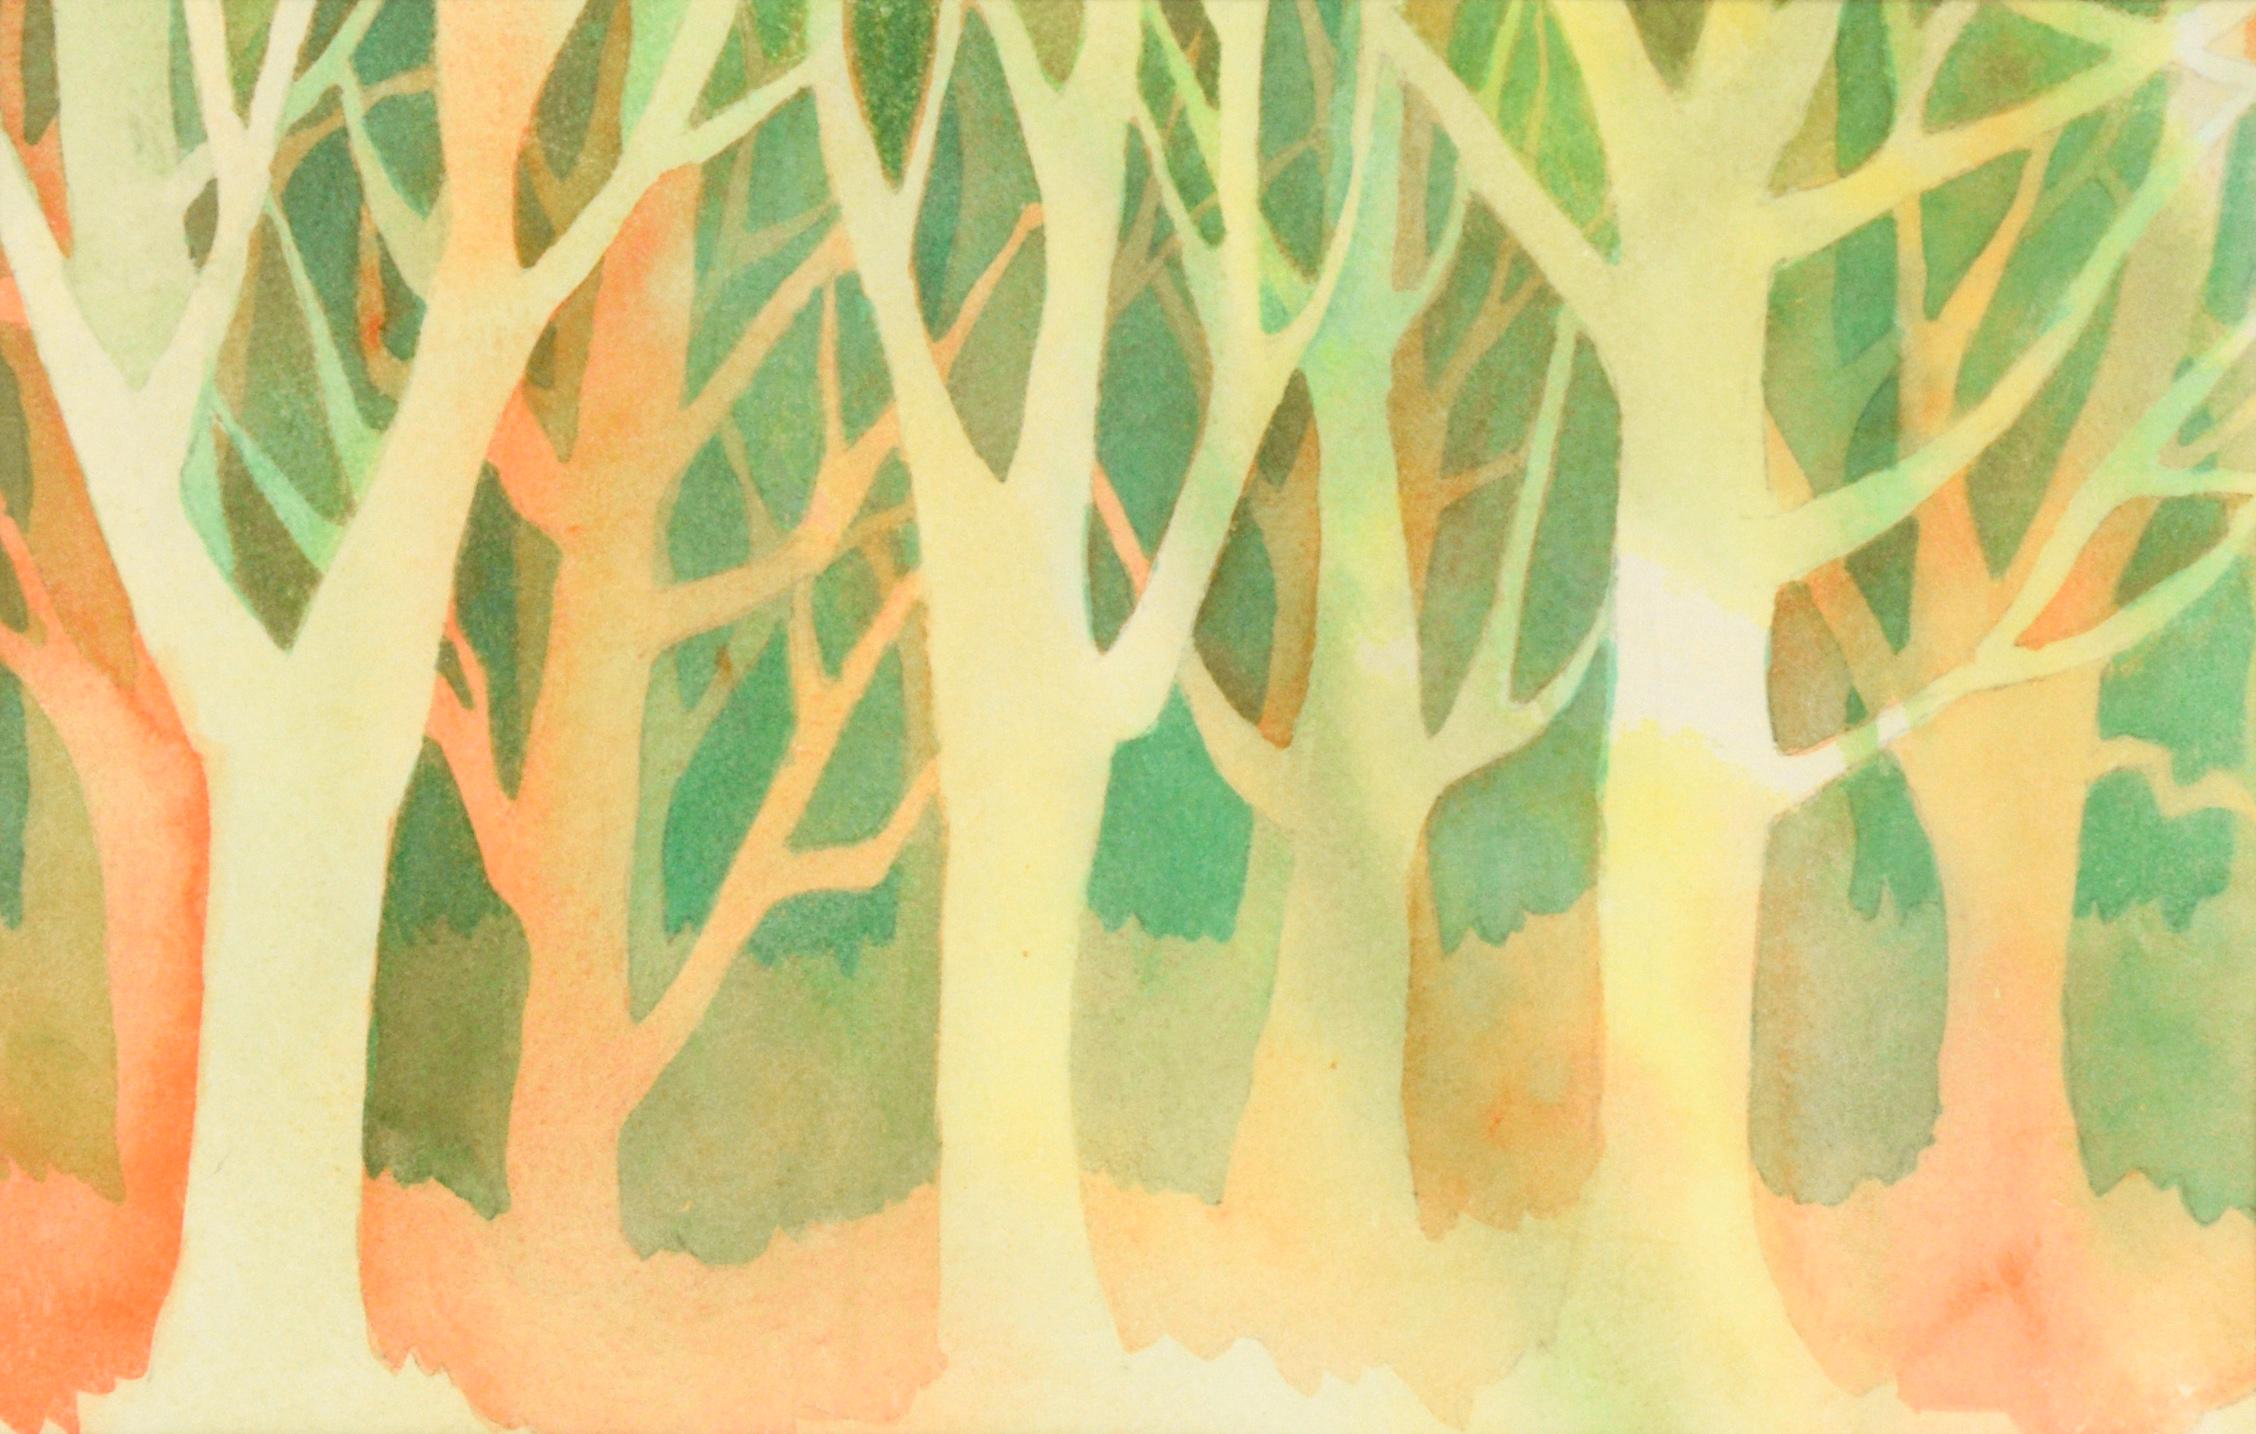 Abstracted Forest Landscape - Art by Dersham